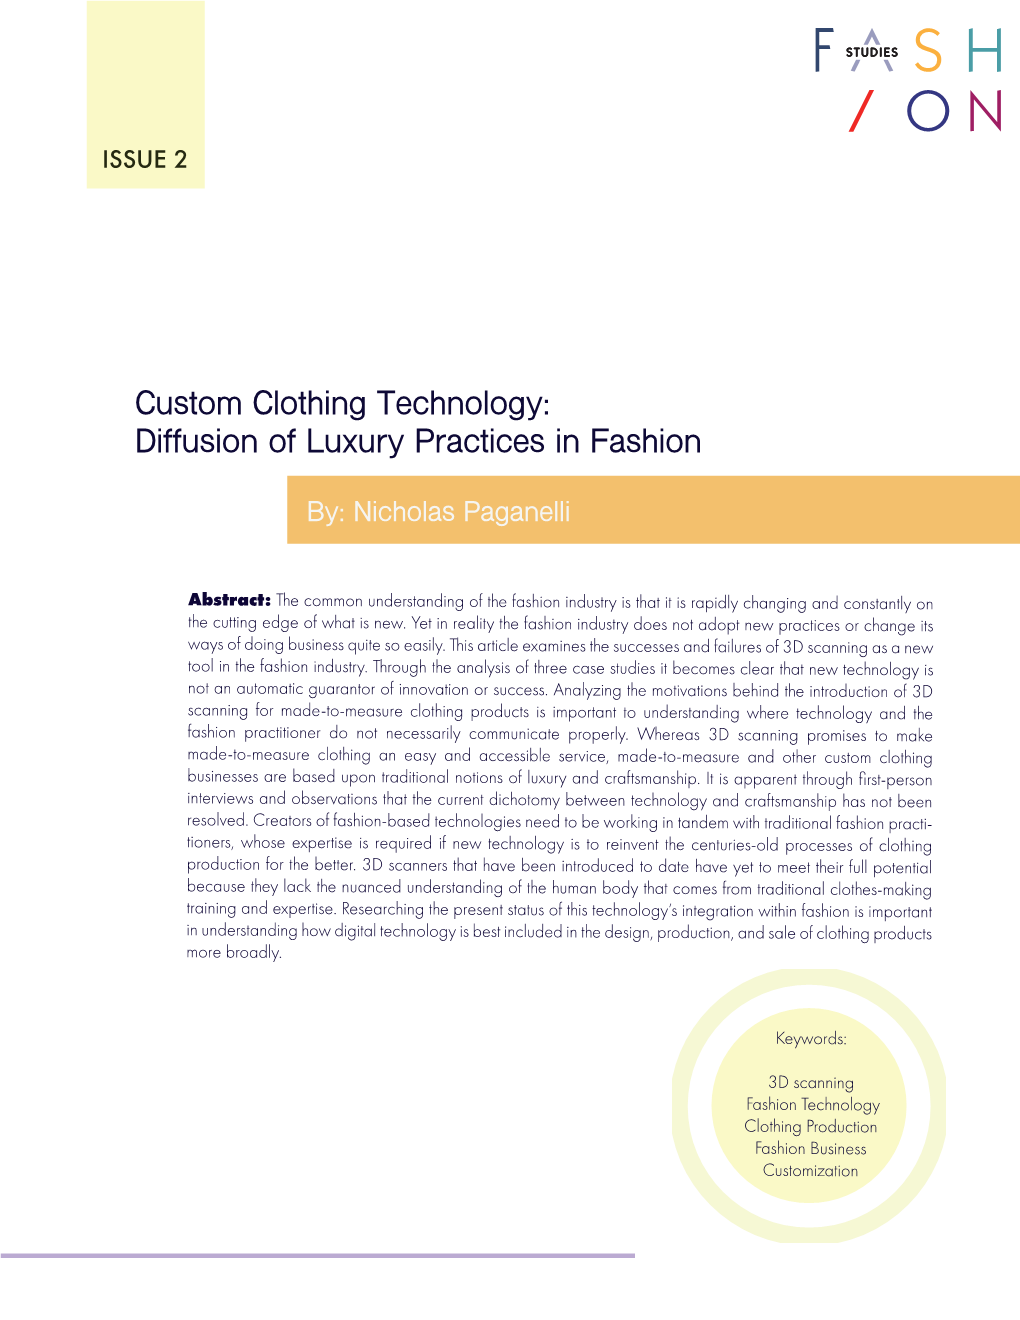 Custom-Clothing-Technology-Diffusion-Of-Luxury-Practices-In-Fashion-732Y.Pdf